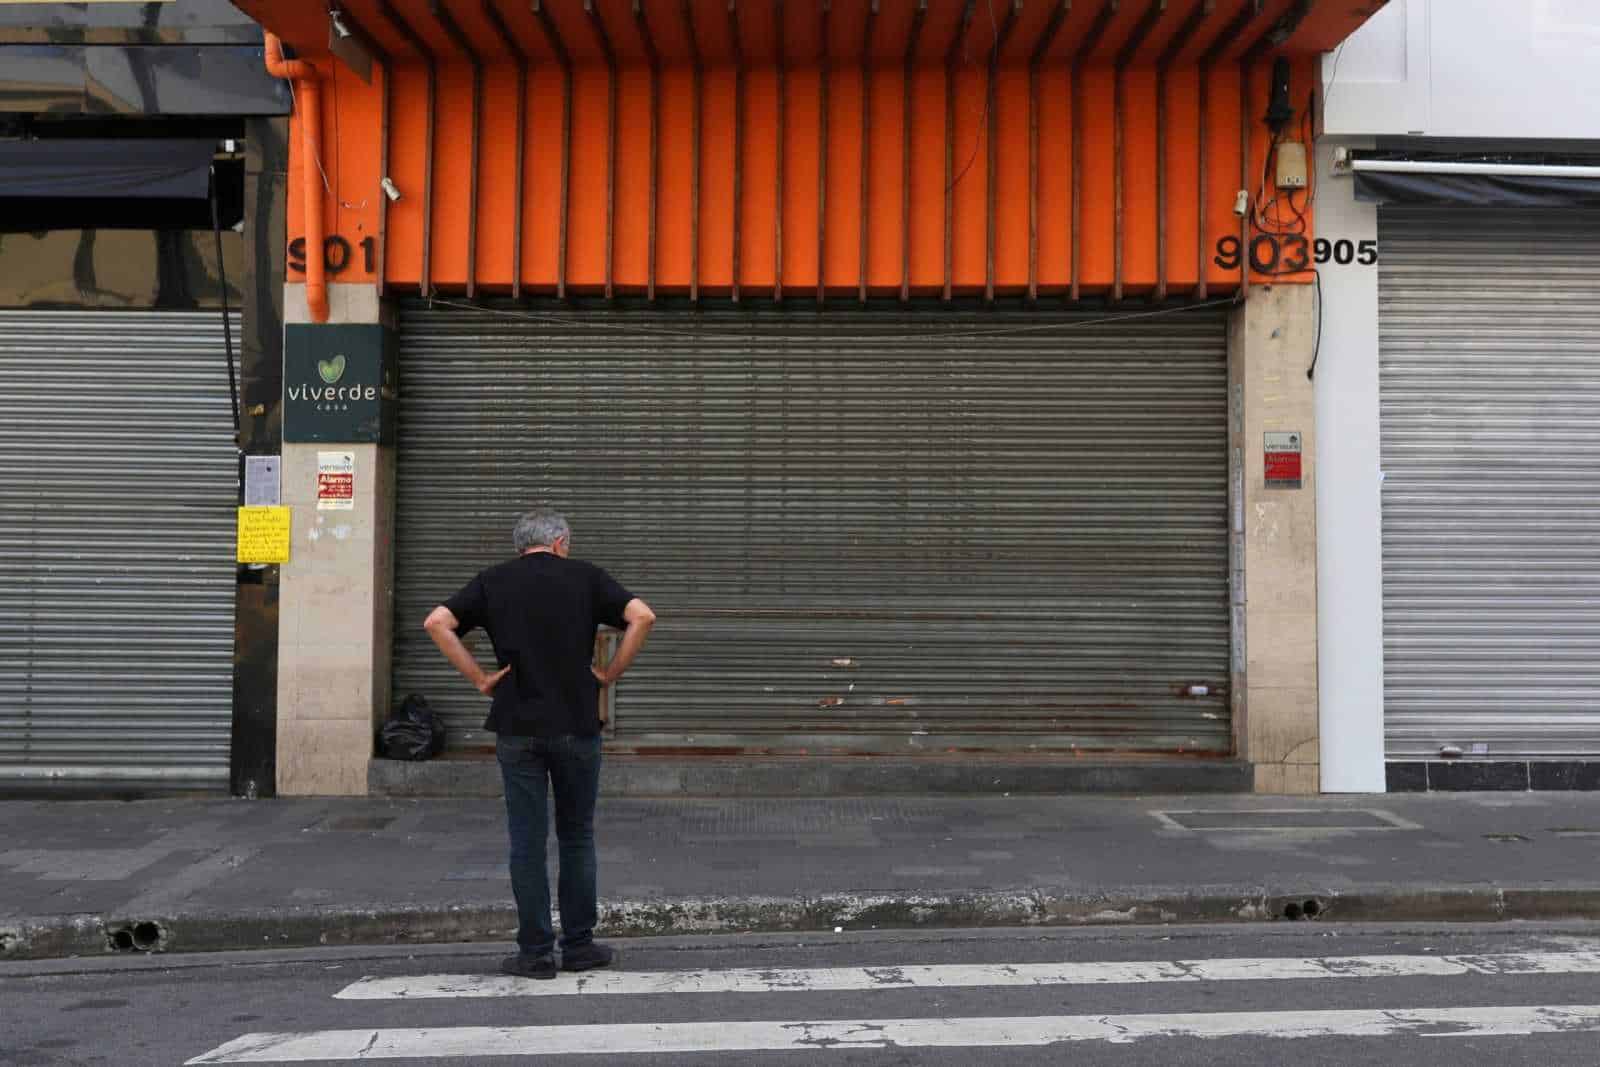 A man is seen in front of closed stores after the city's government decreed the closure of shops and stores as a precautionary measure against coronavirus disease (COVID-19) in downtown Sao Paulo, Brazil, March 20, 2020. REUTERS/Amanda Perobelli